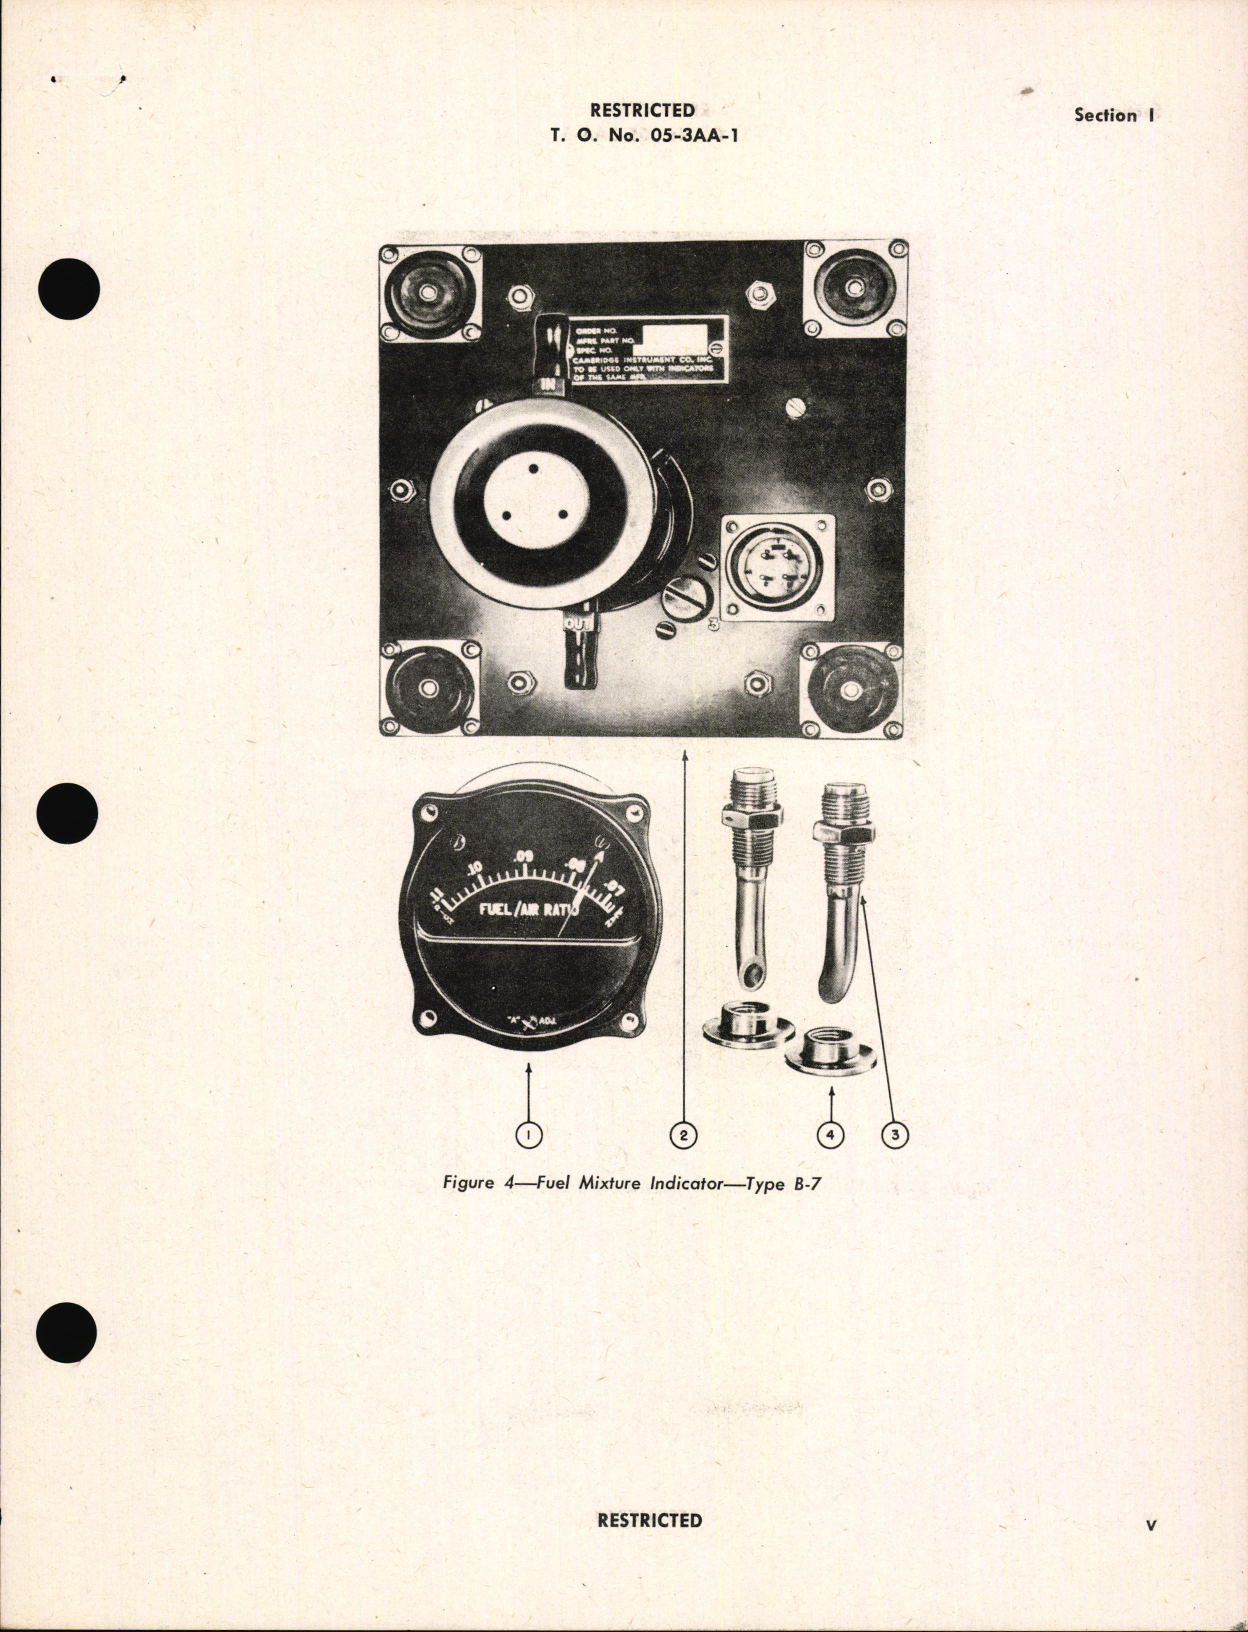 Sample page 7 from AirCorps Library document: Handbook of Instructions with Parts Catalog for Fuel Mixture Indicators